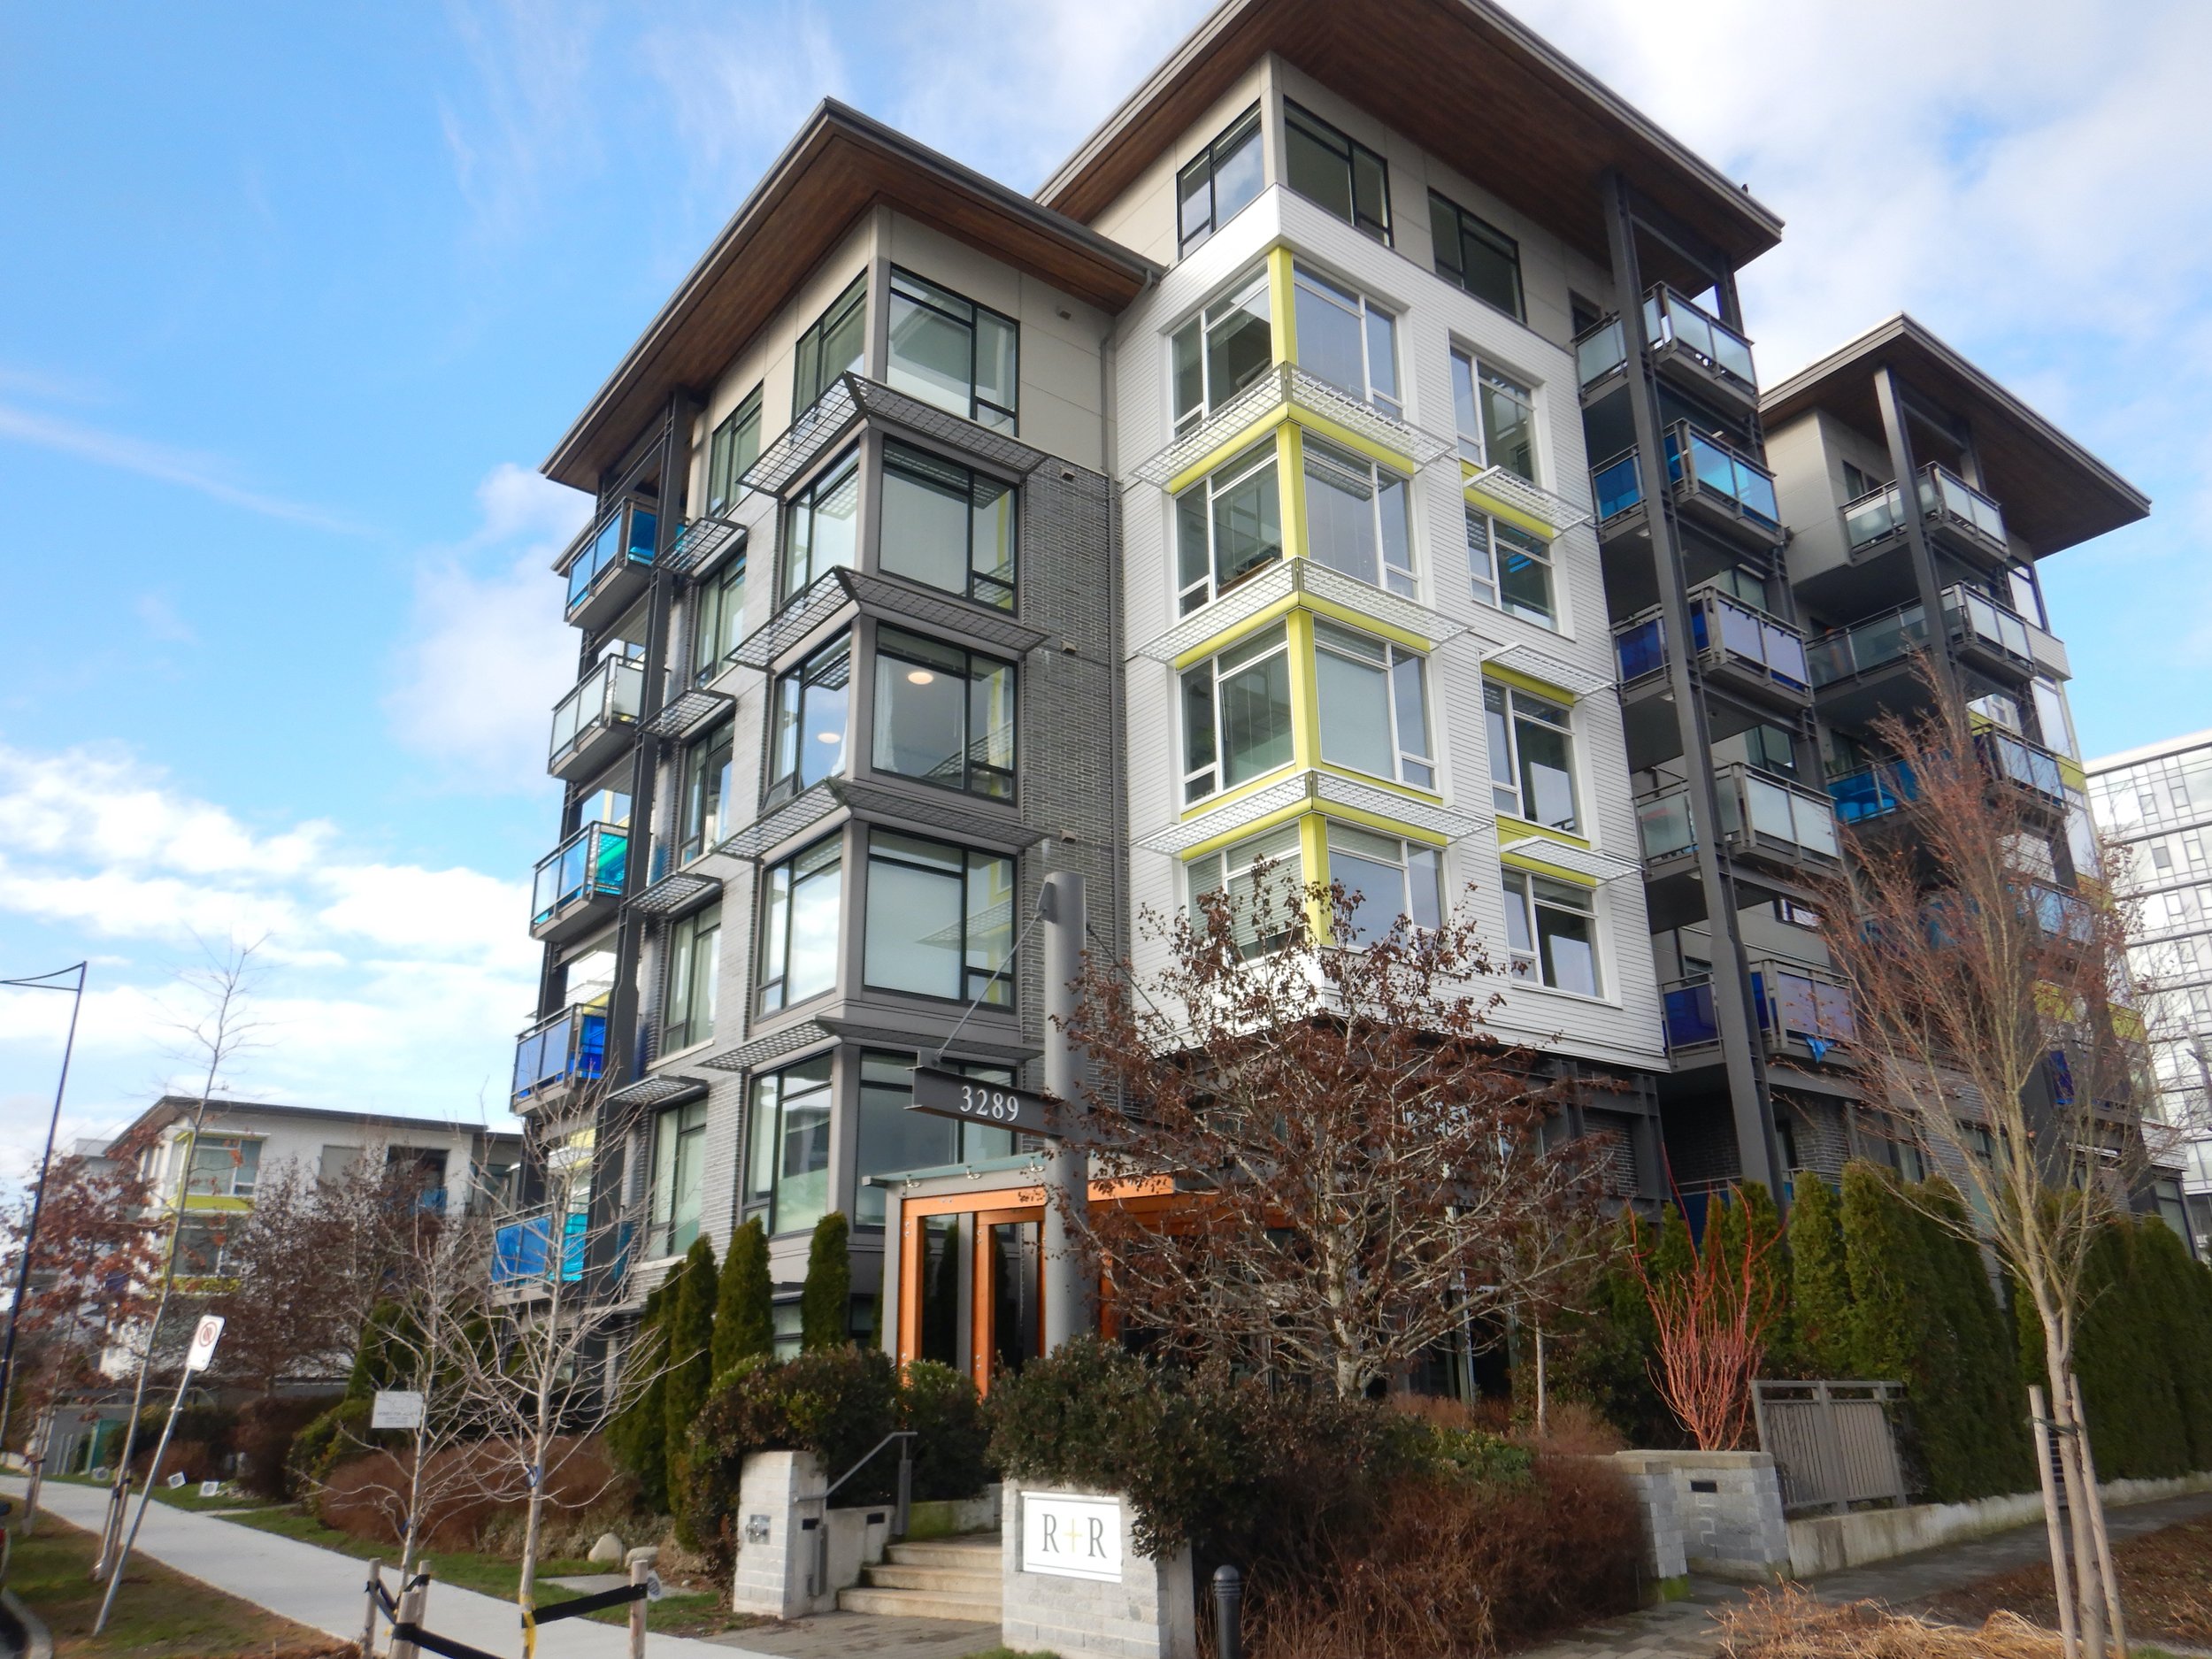 Random Condos in the River District, image by Iain